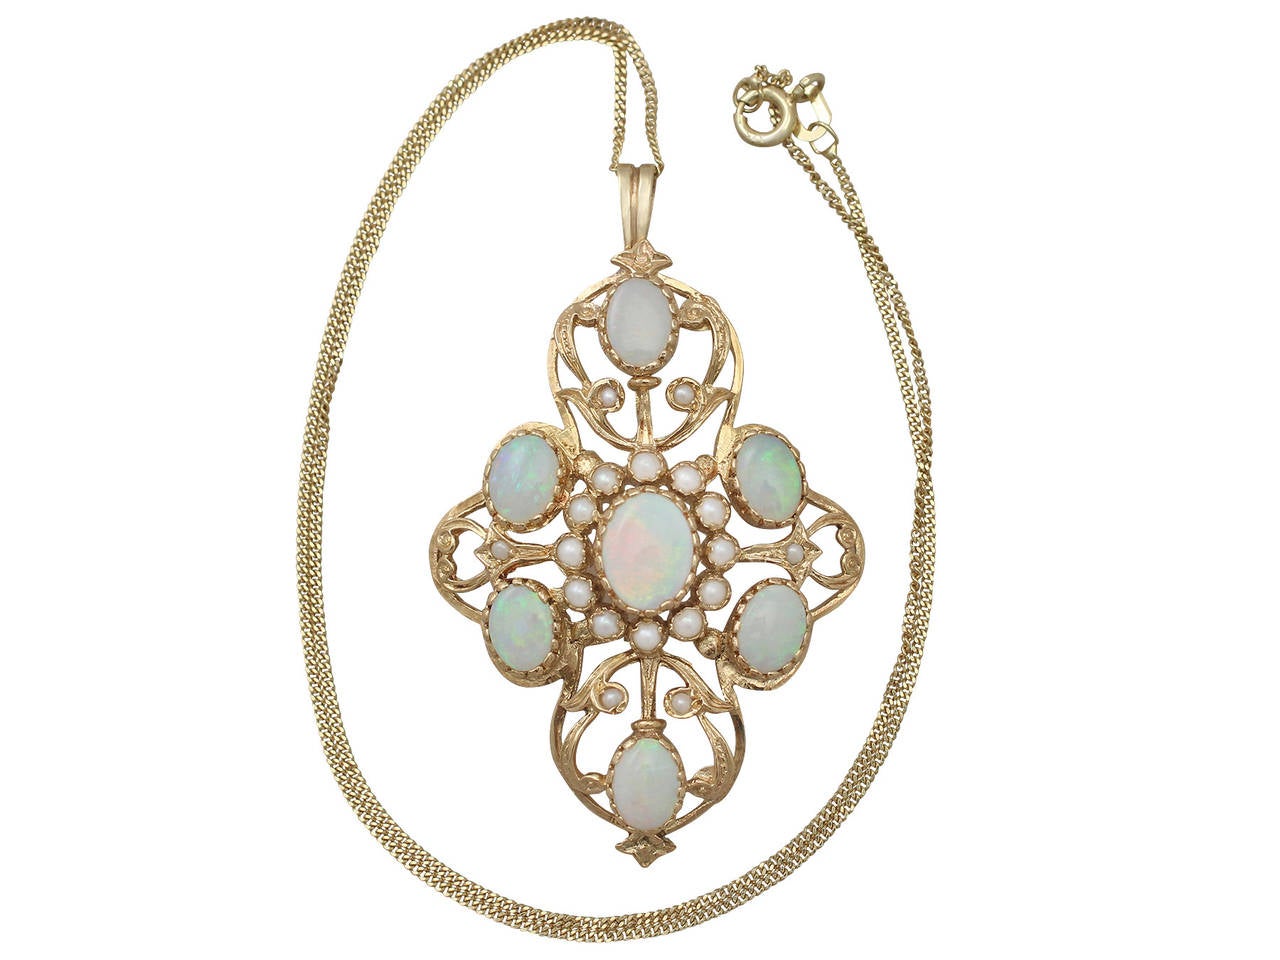 A fine and impressive vintage opal and pearl, 9 karat yellow gold pendant in the Victorian style; part of our diverse vintage jewelry and estate jewelry collections

This fine and impressive vintage pendant has been crafted in 9k yellow gold.

The